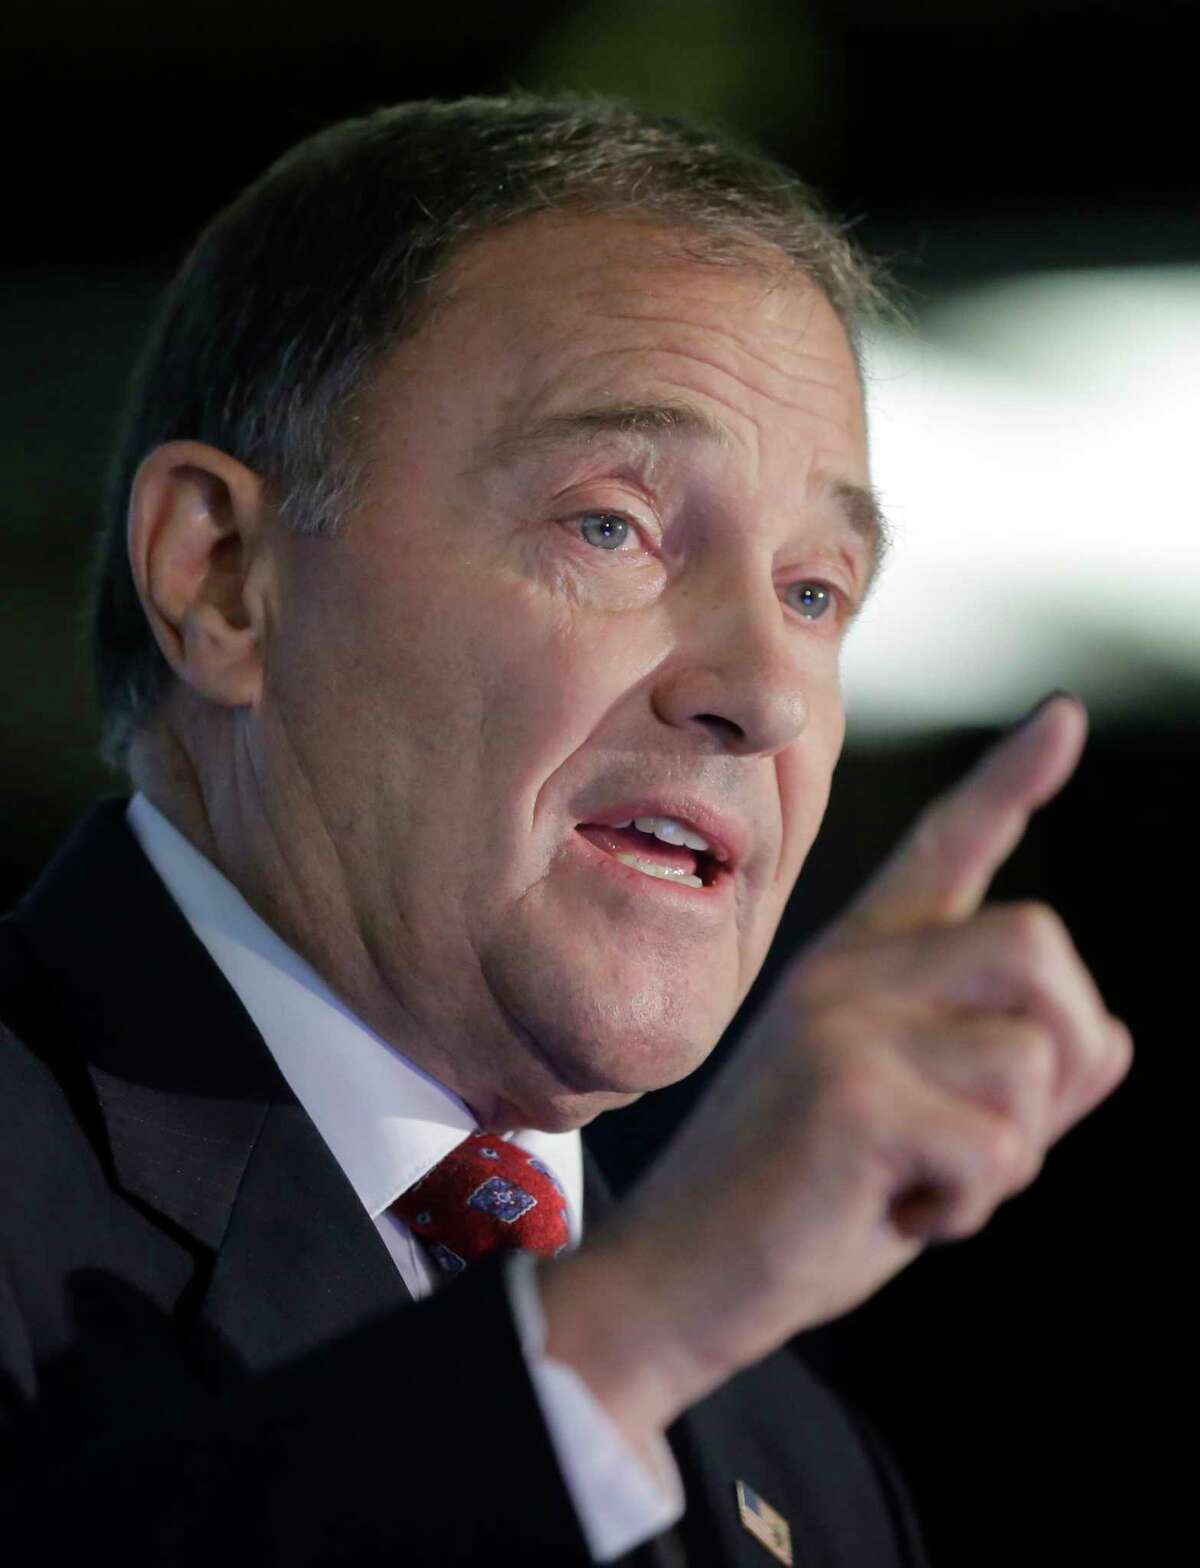 FILE - In this Sept. 16, 2016 file photo, Utah Gov. Gary Herbert speaks at a debate in Salt Lake City. Organizers of a lucrative outdoor trade show that's been held twice yearly in Utah for two decades say they will continue looking for a new home after hearing "more of the same" on public lands from Herbert during a conference call Thursday, Feb. 16, 2017. (AP Photo/Rick Bowmer, File)